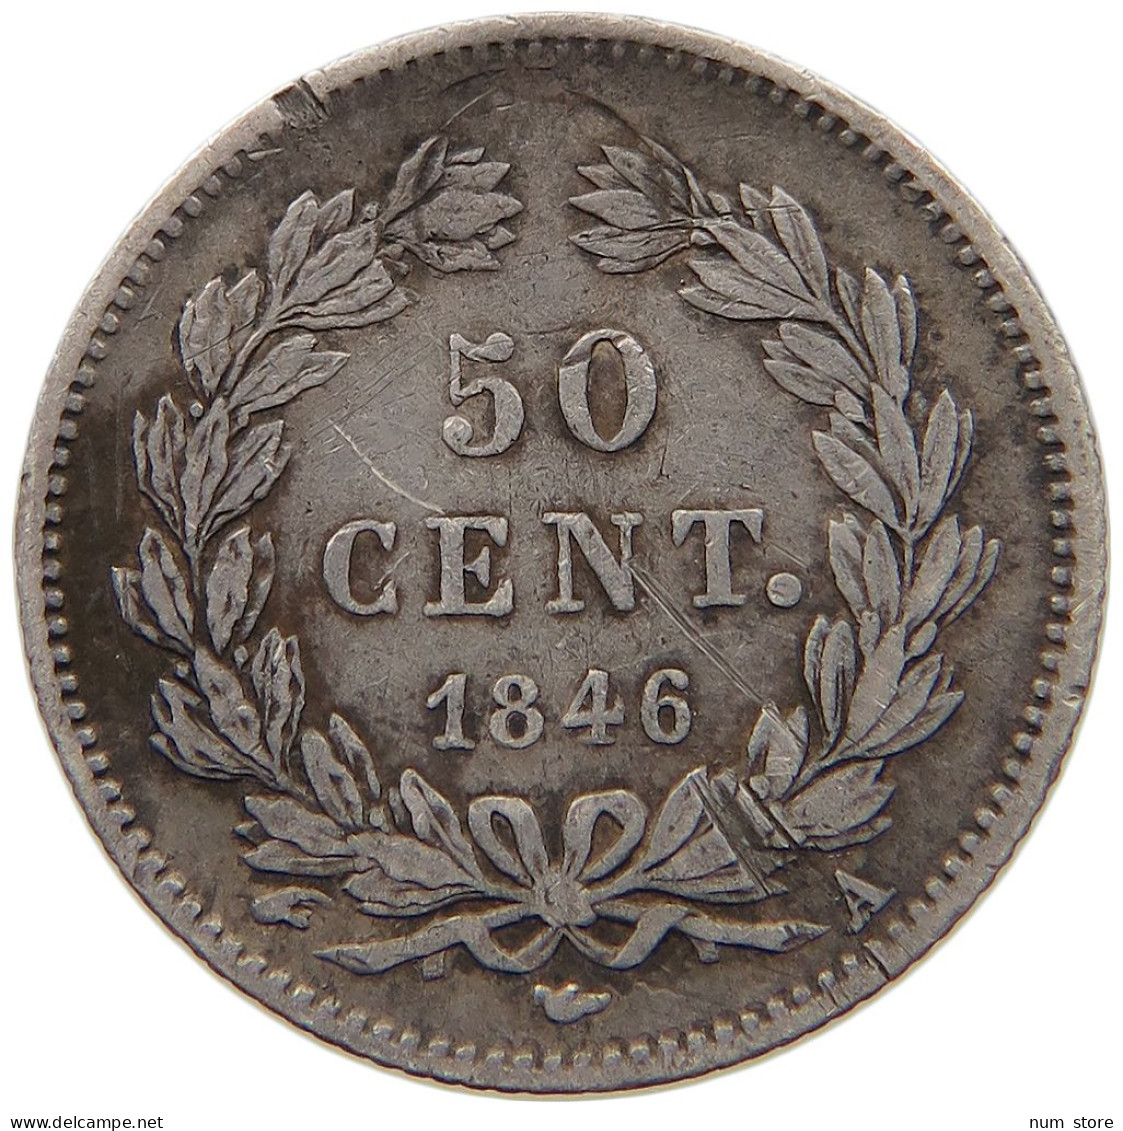 FRANCE 50 CENTIMES 1846 A LOUIS PHILIPPE I. (1830-1848) #c010 0423 - 50 Centimes